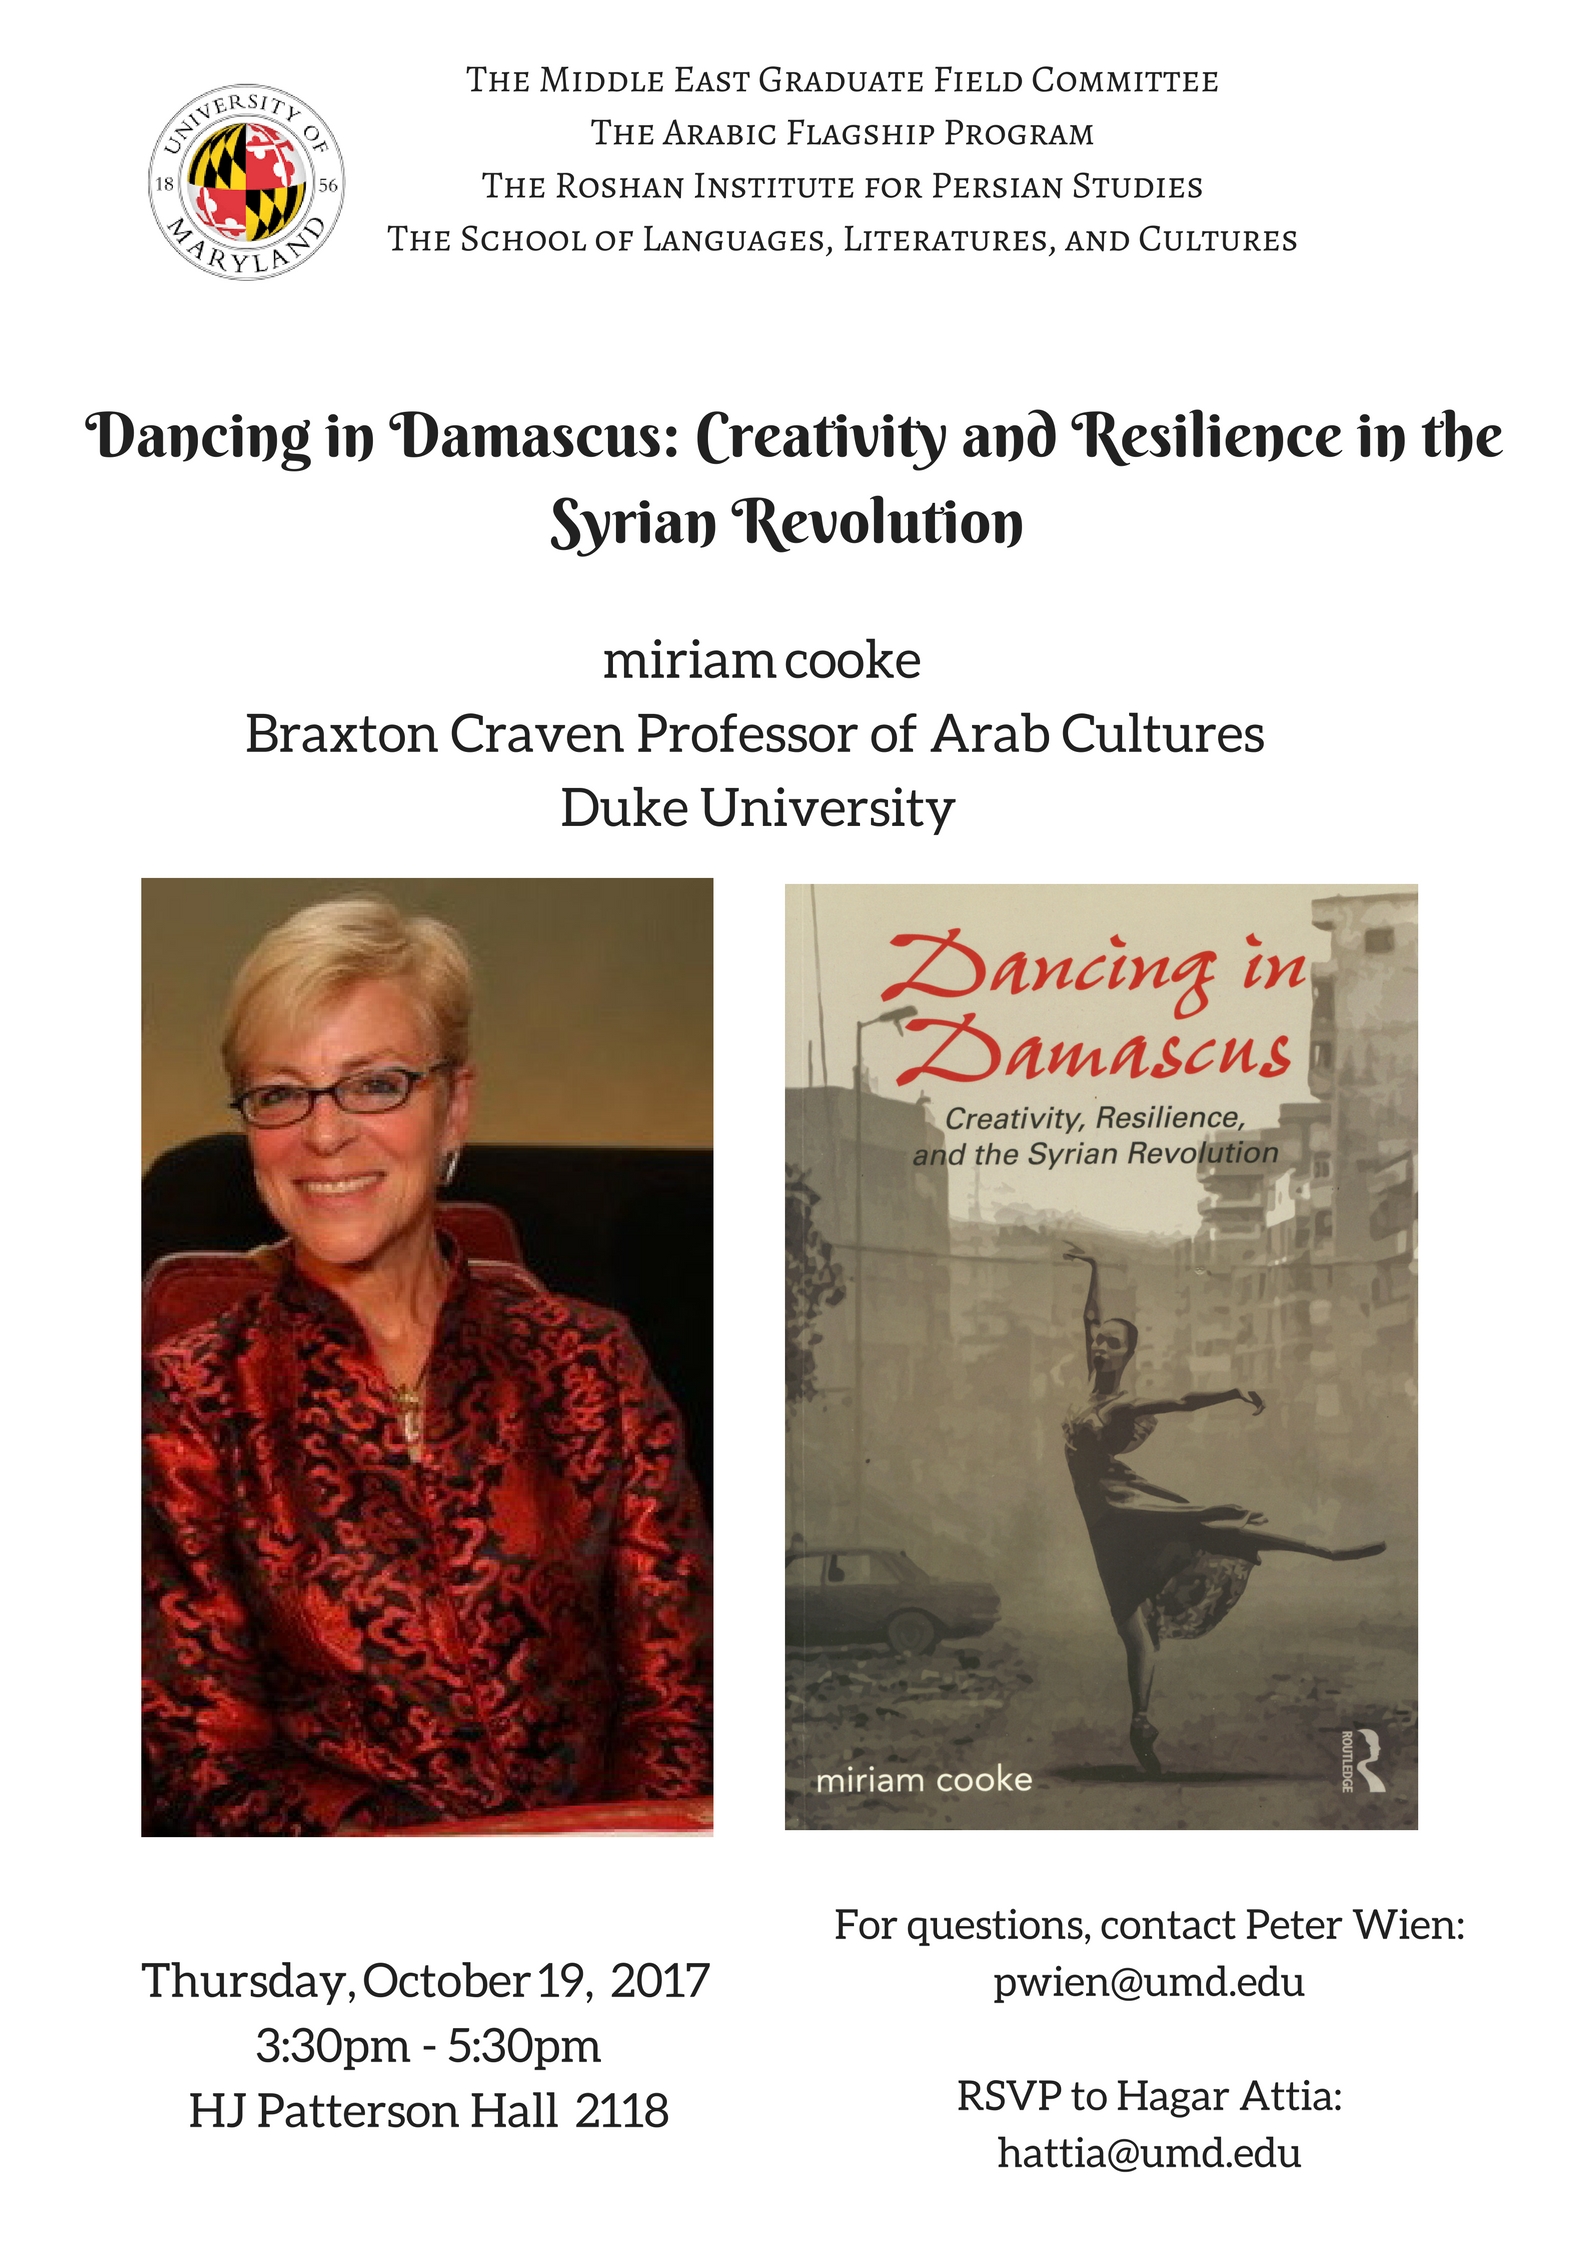 Image for event - Dancing in Damascus: Creativity and Resilience in the Syrian Revolution